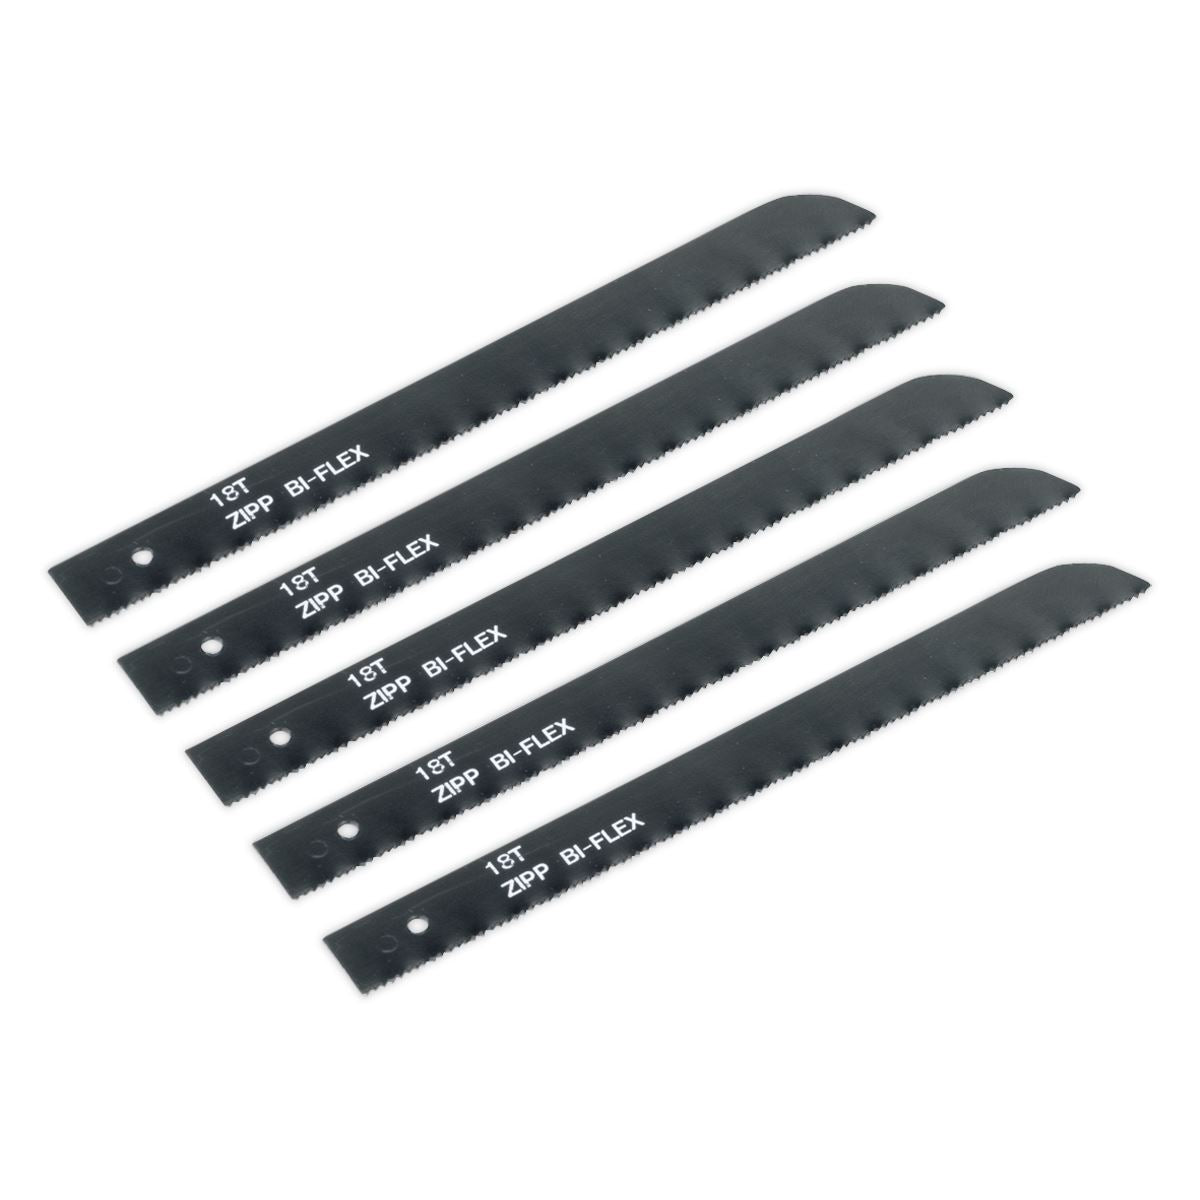 Sealey 141mm Air Saw Blade 18tpi - Pack of 5